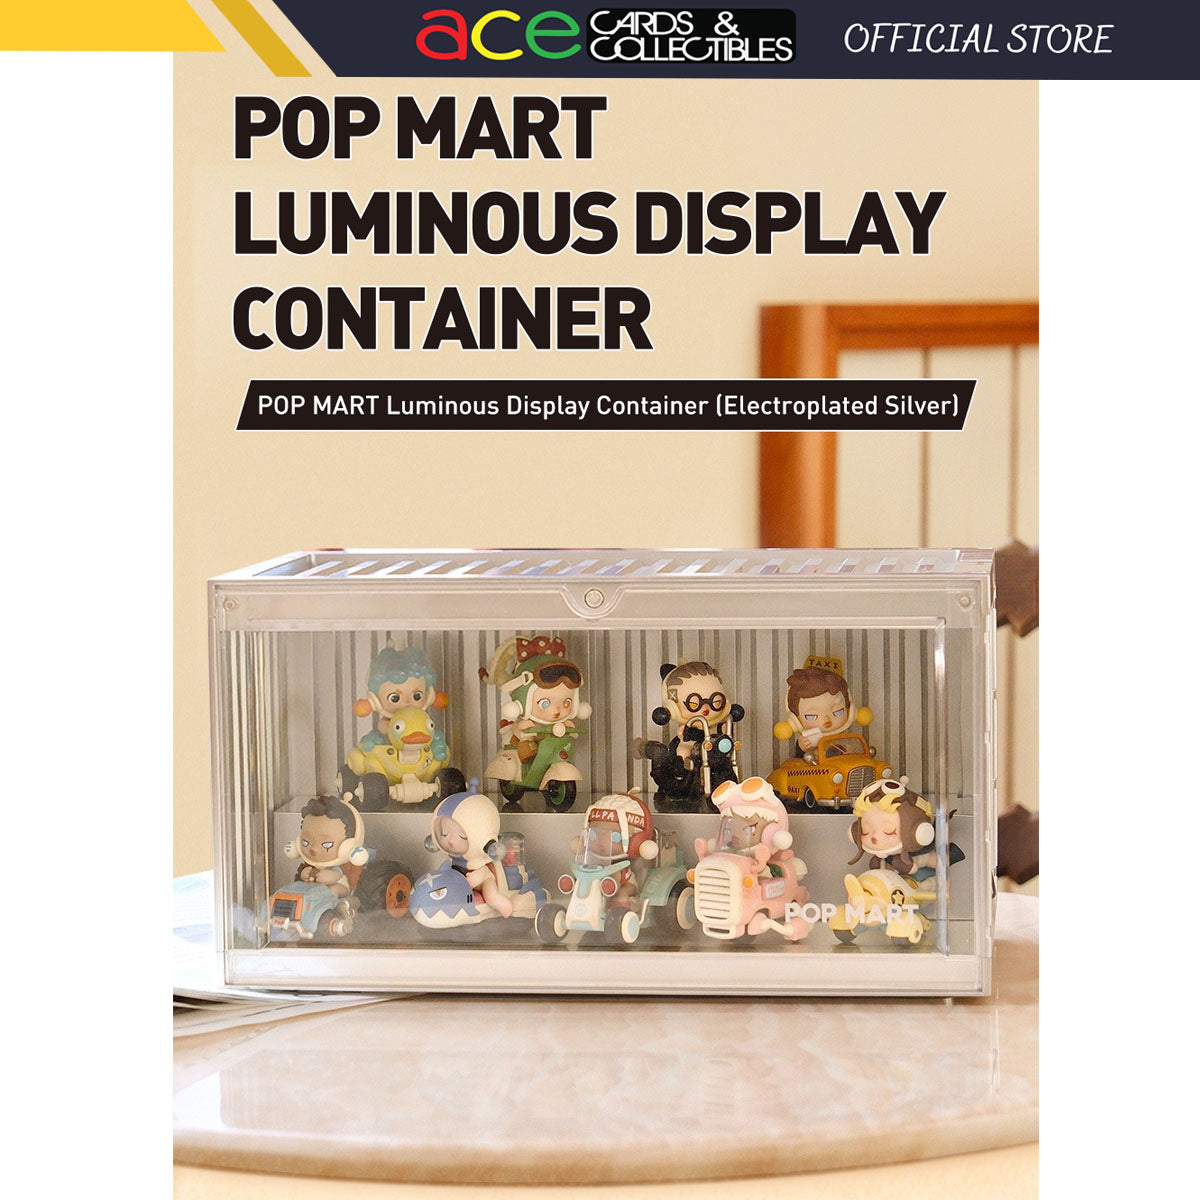 POP MART Luminous Display Container (Electroplated Silver)-Pop Mart-Ace Cards & Collectibles